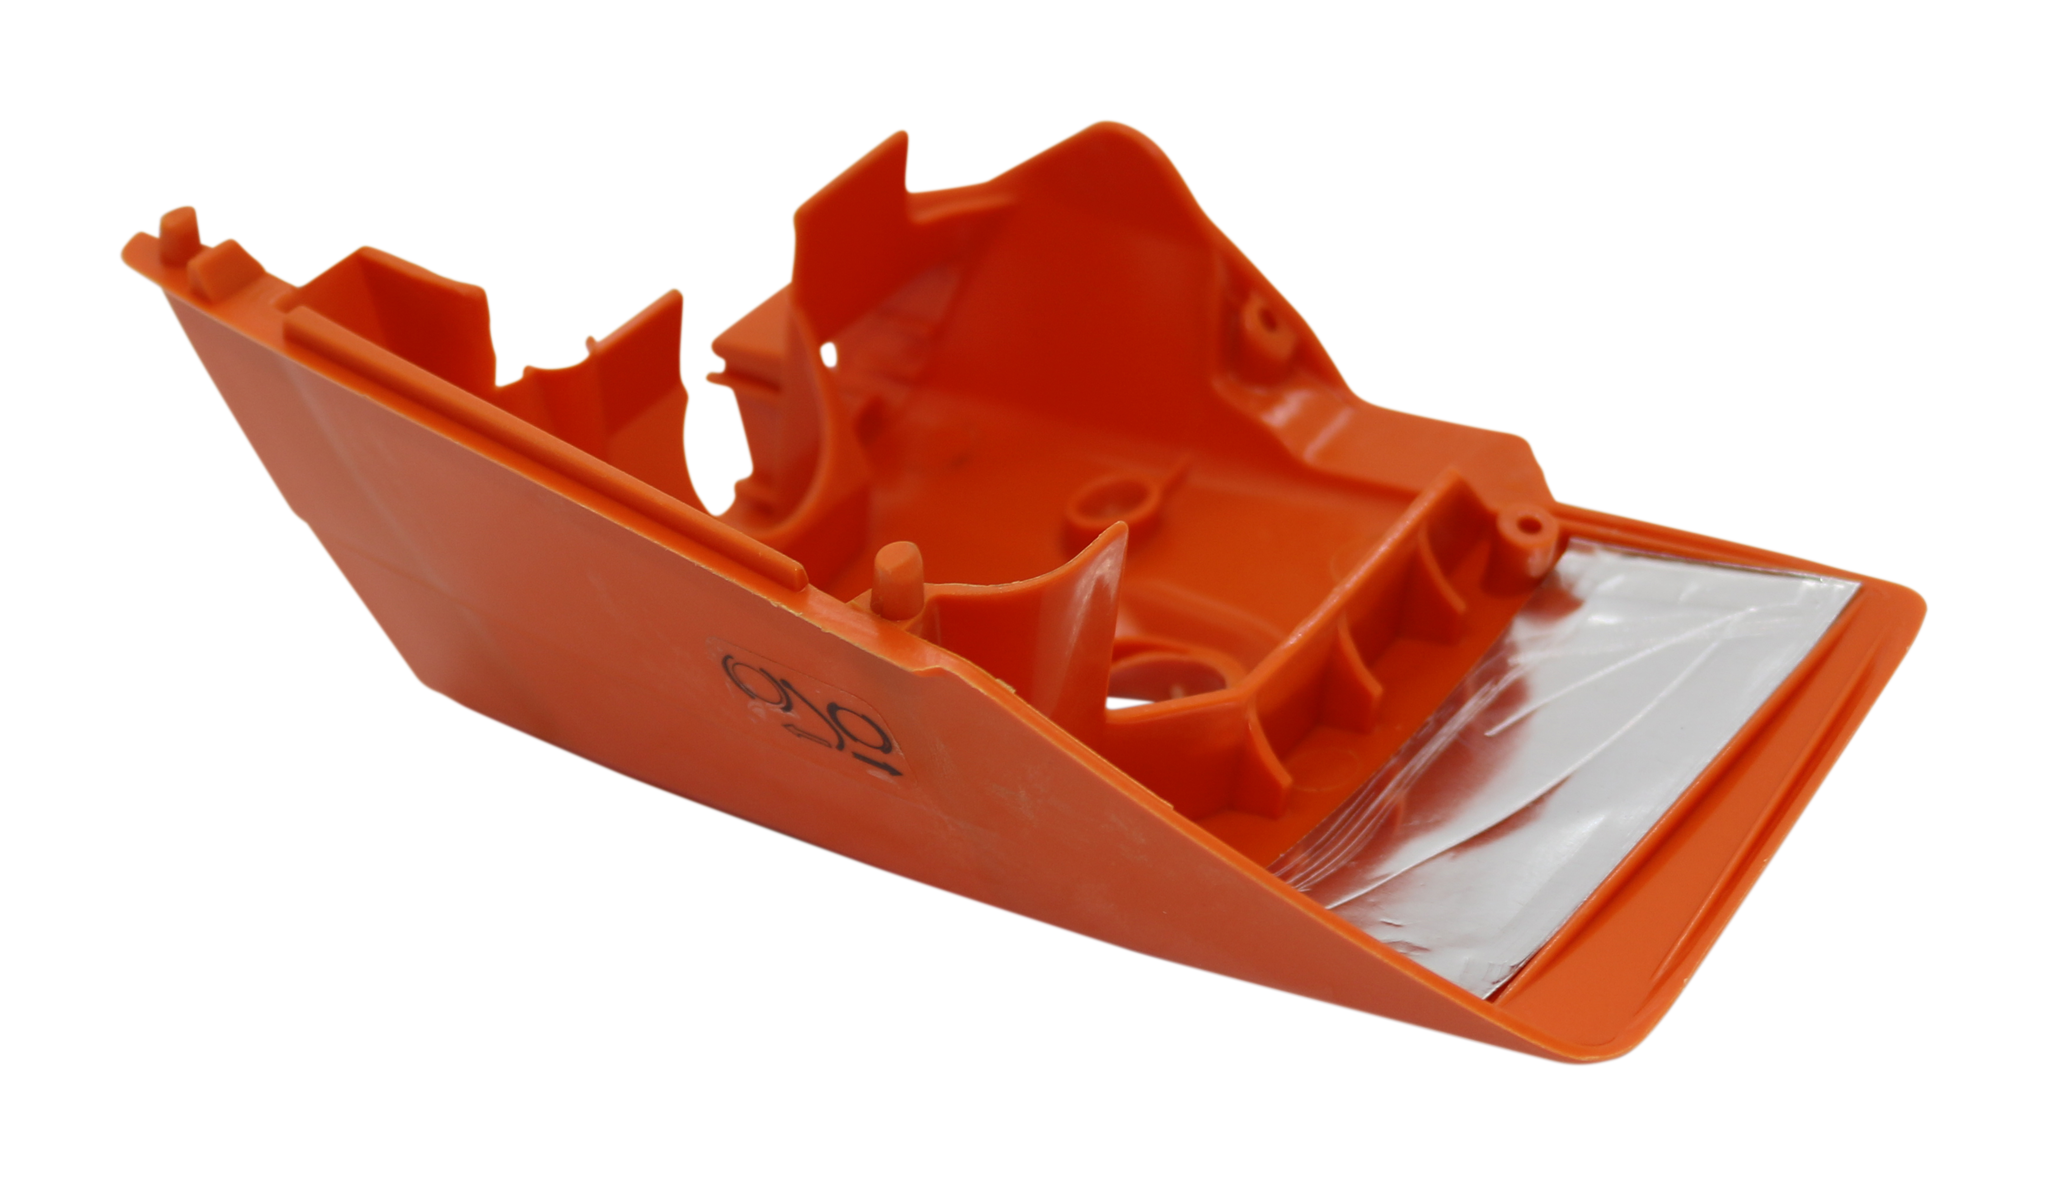 Top Cover for Stihl 026 MS260 replaces 1121 080 1605   PJ26003